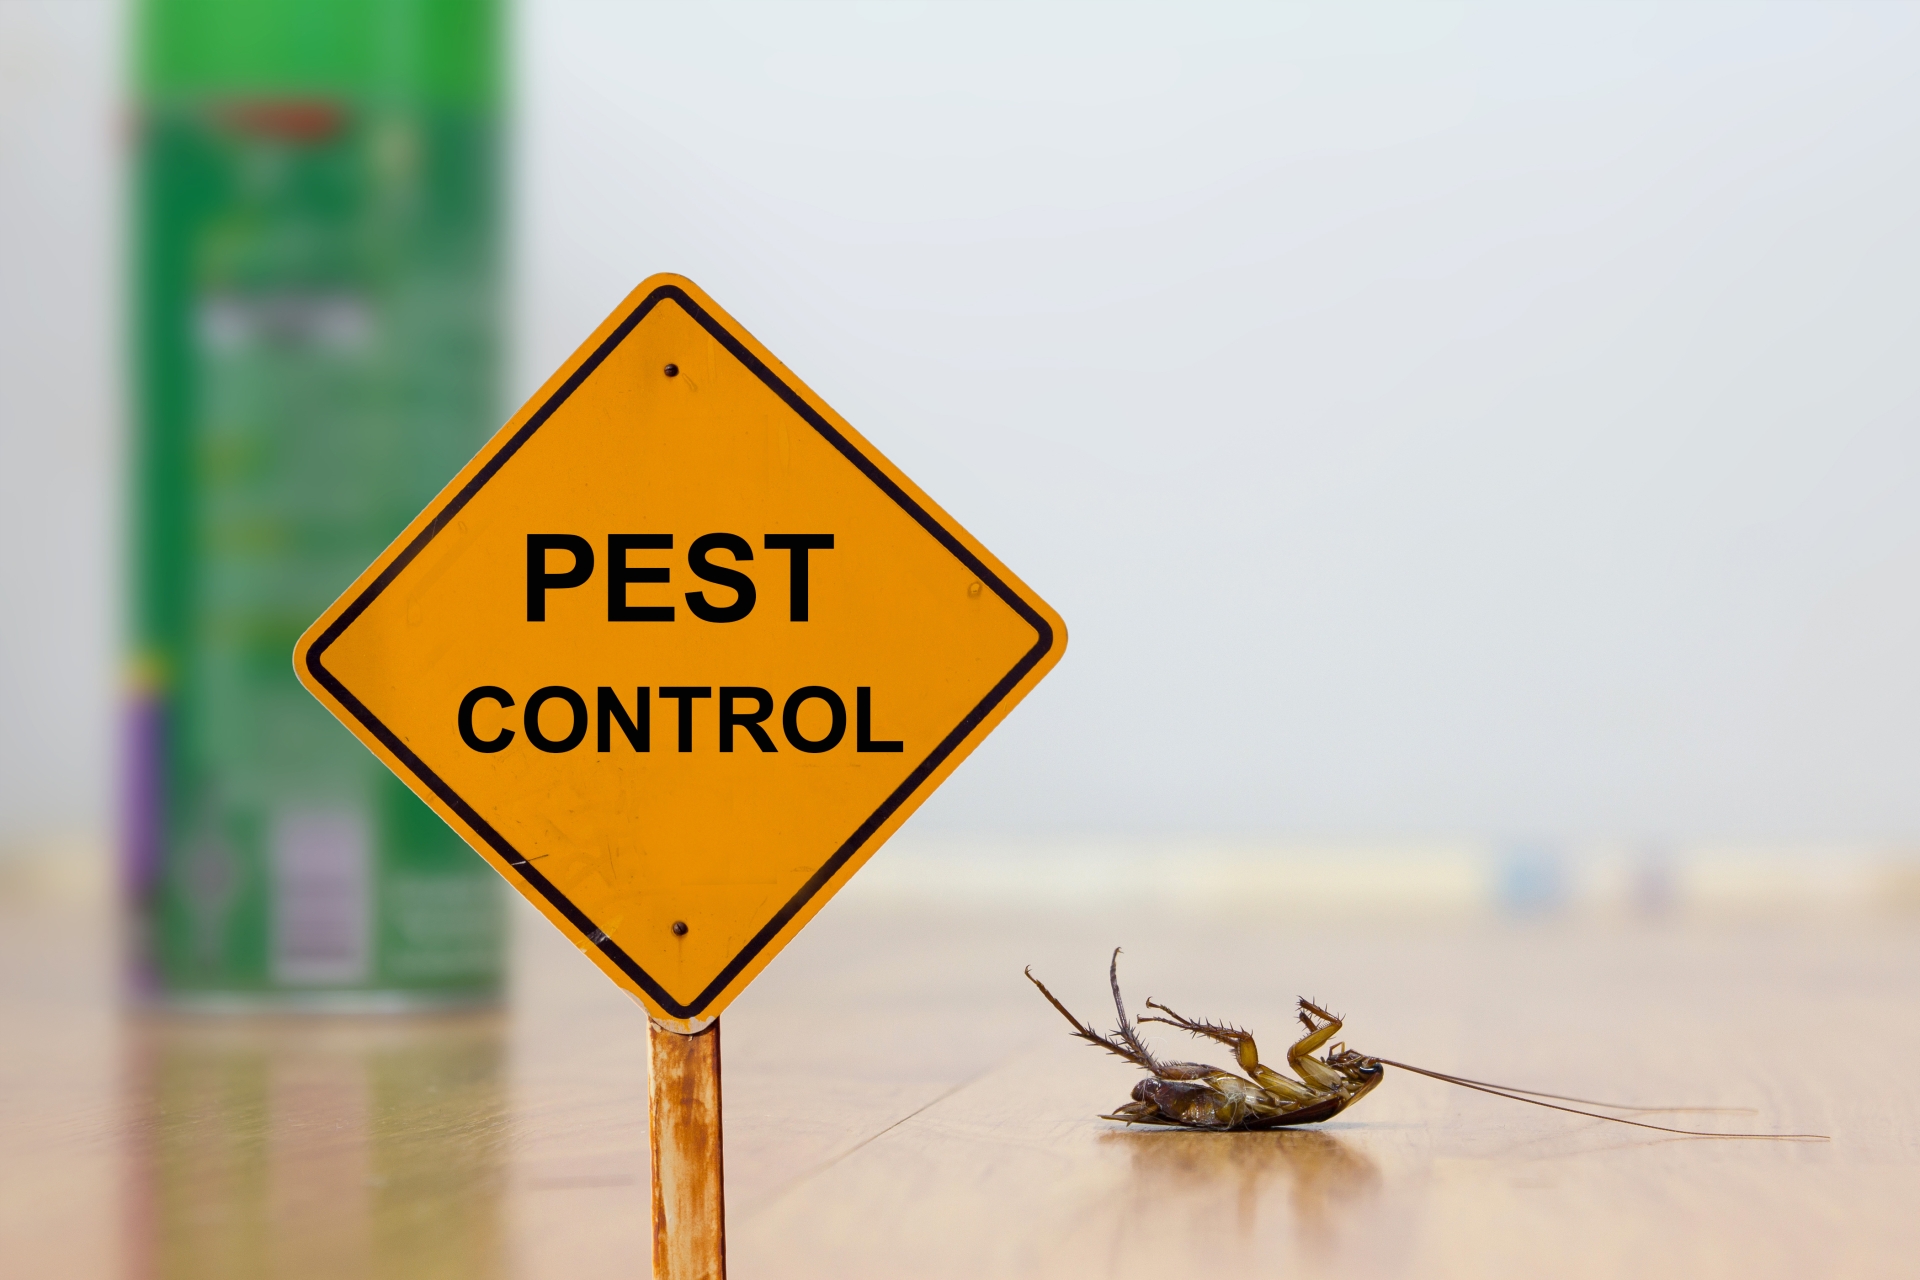 24 Hour Pest Control, Pest Control in Greenford, UB6. Call Now 020 8166 9746